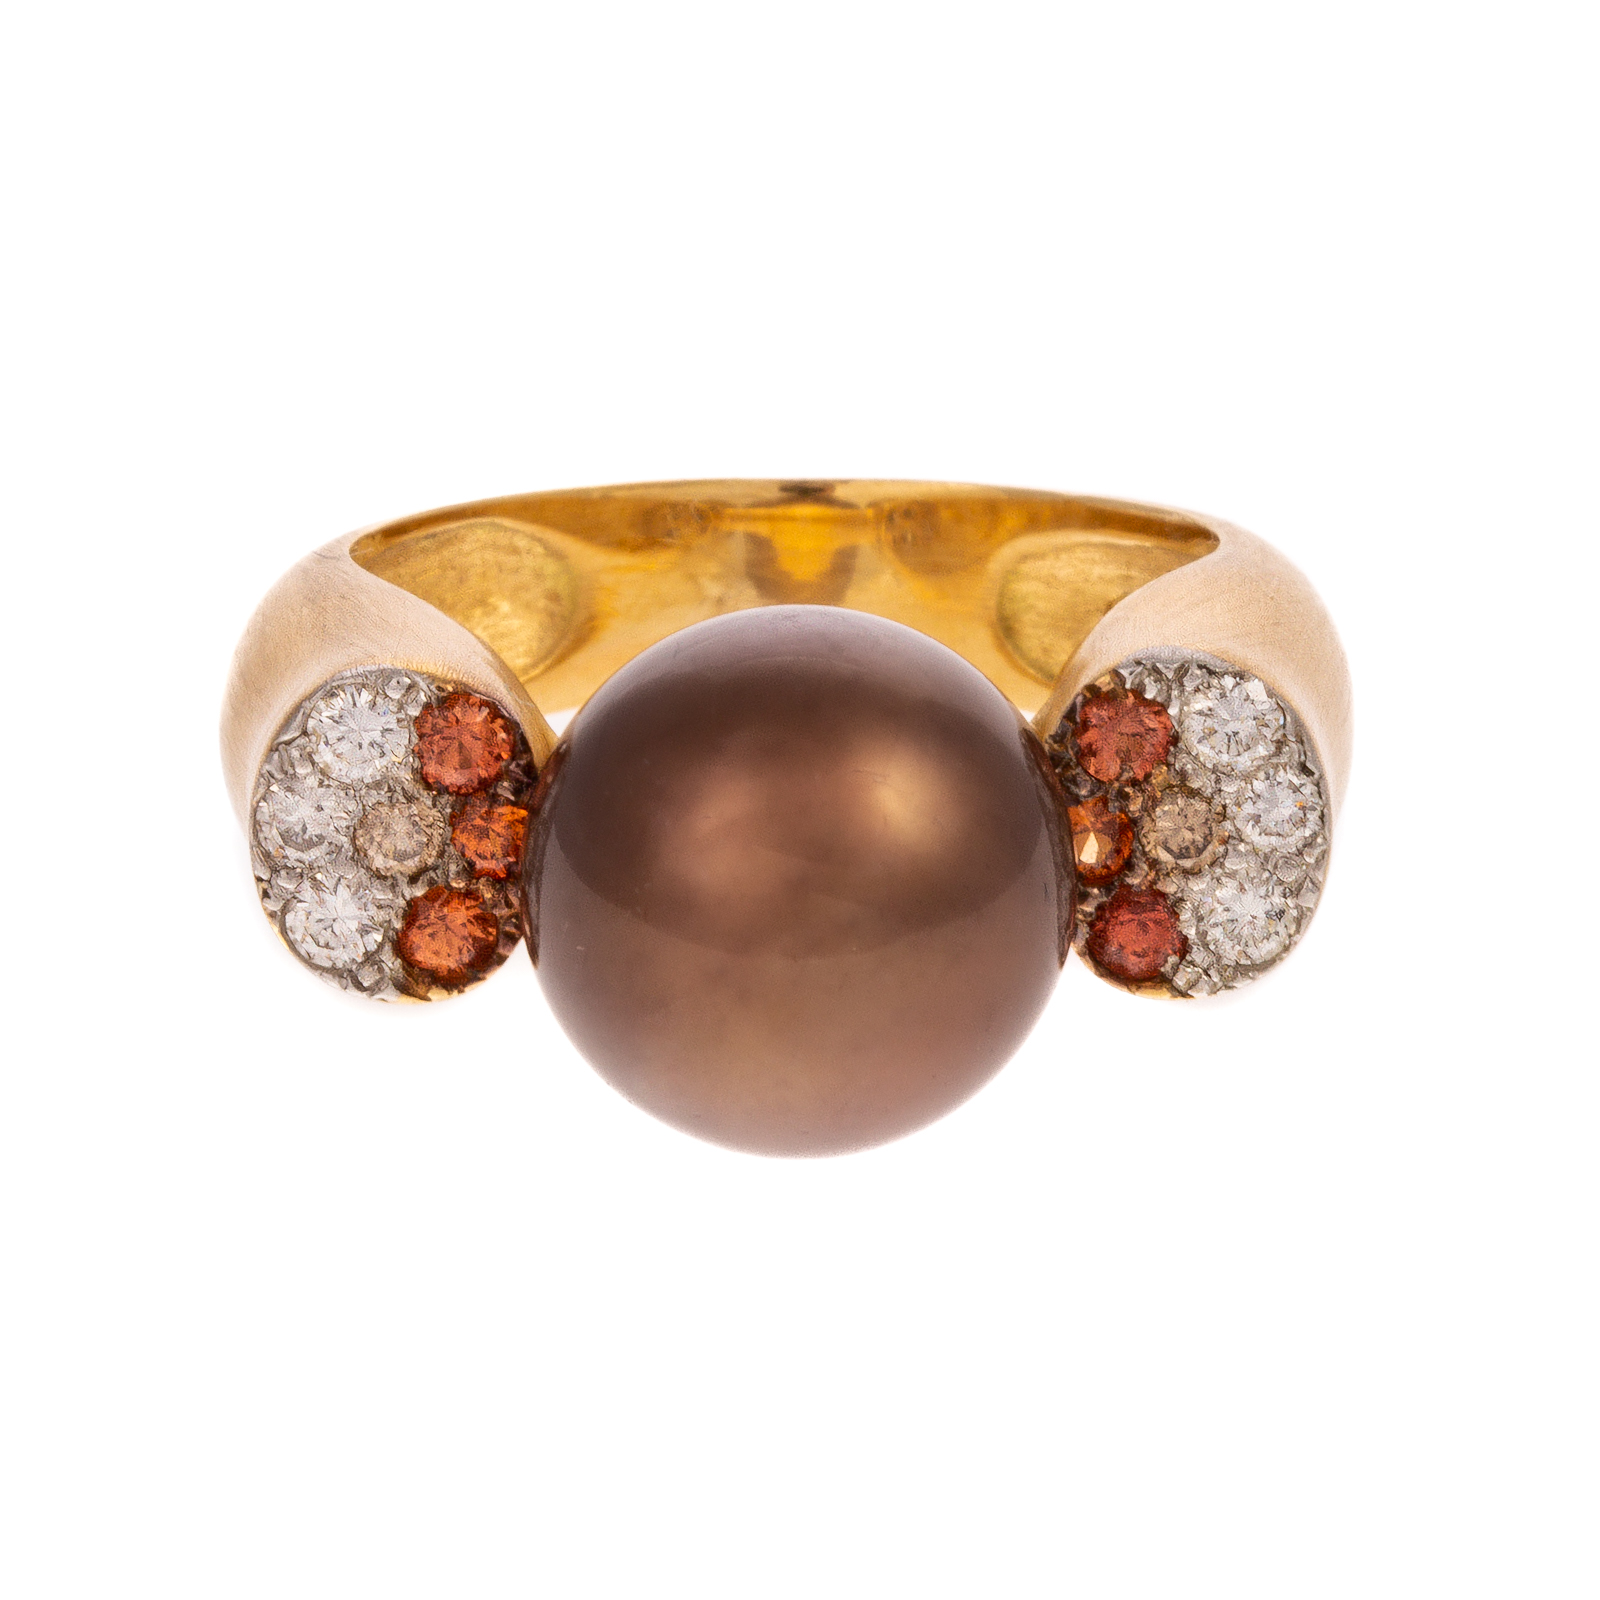 AN 18K YELLOW GOLD PEARL RING BY 33859b